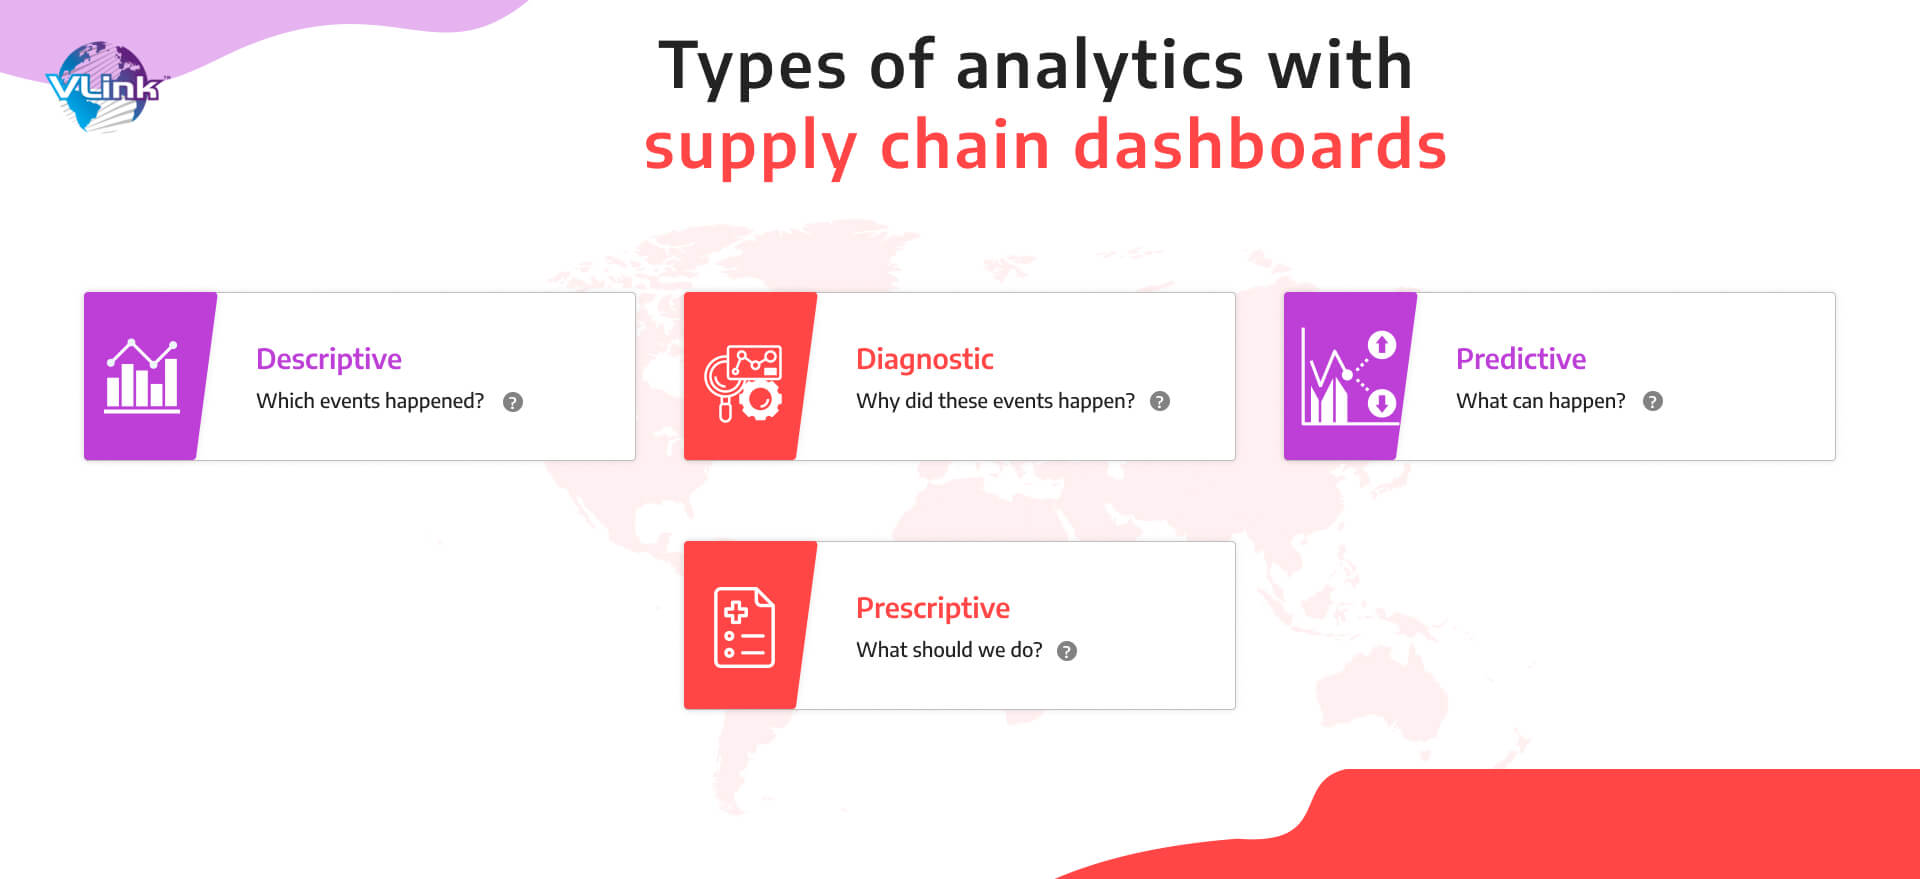 Types of analytics with supply chain dashboards